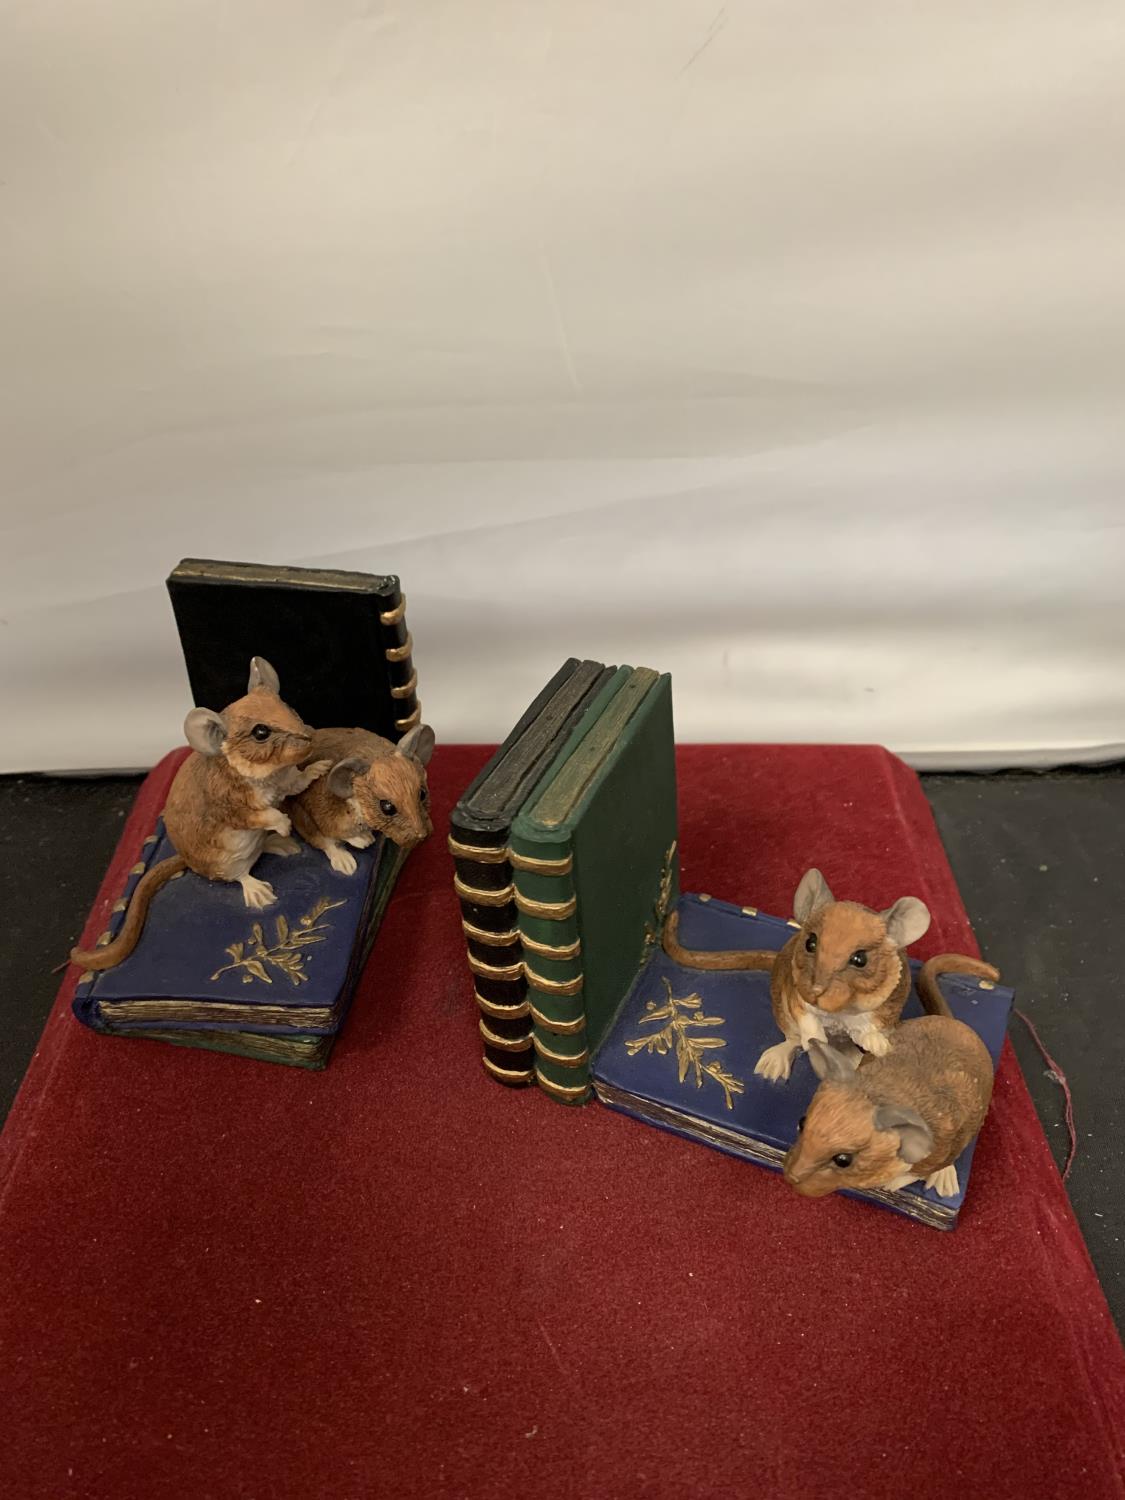 A PAIR OF TEVIOTDALE MOUSE THEMED BOOK ENDS AND TWO FIGURINES OF MICE WITH QUILLS IN BOXES (NOT - Image 2 of 5